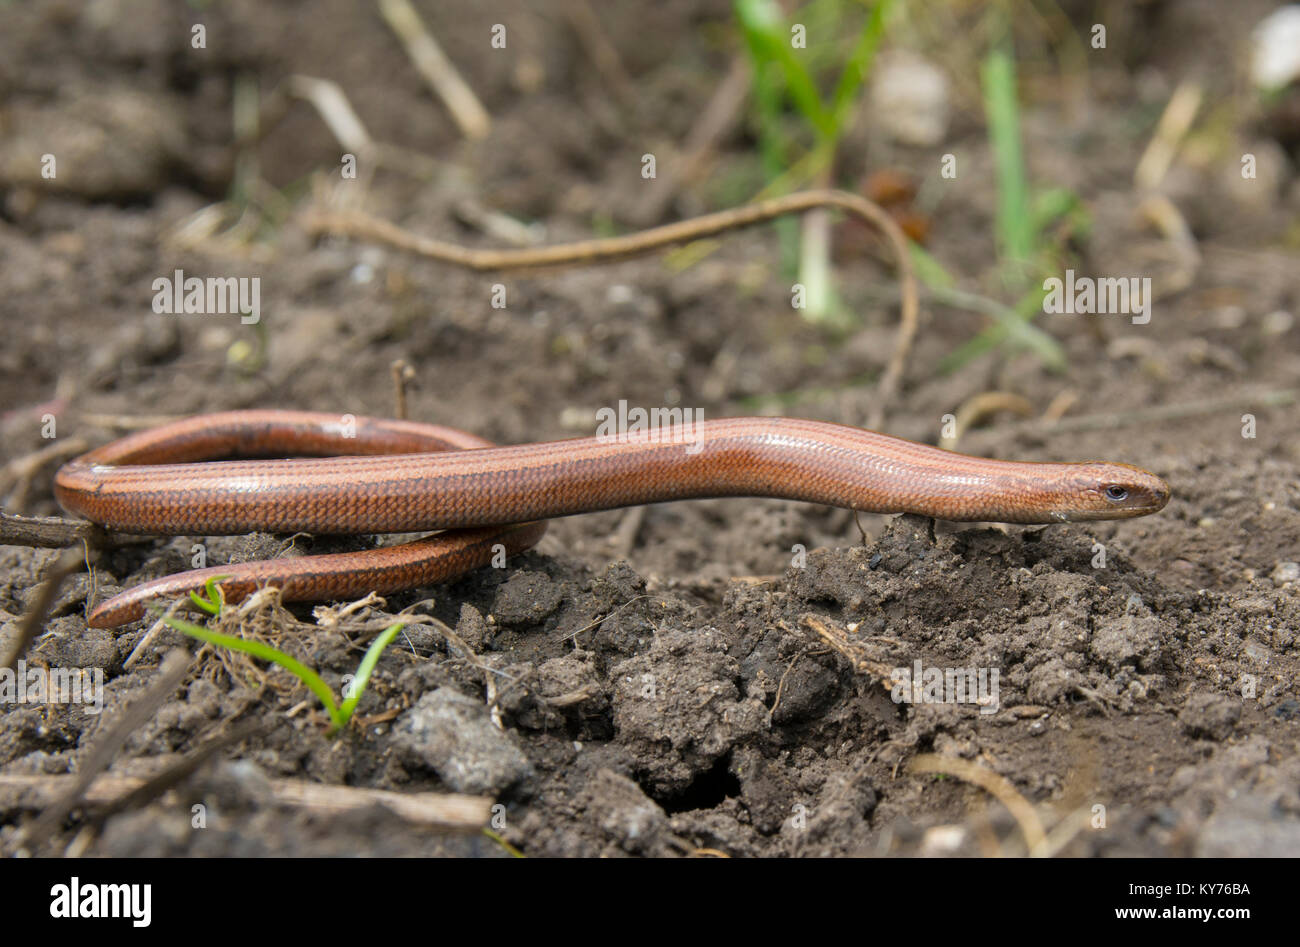 Female copper coloured slow worm anguis fragilis on earthy ground, peak district northern England. Stock Photo